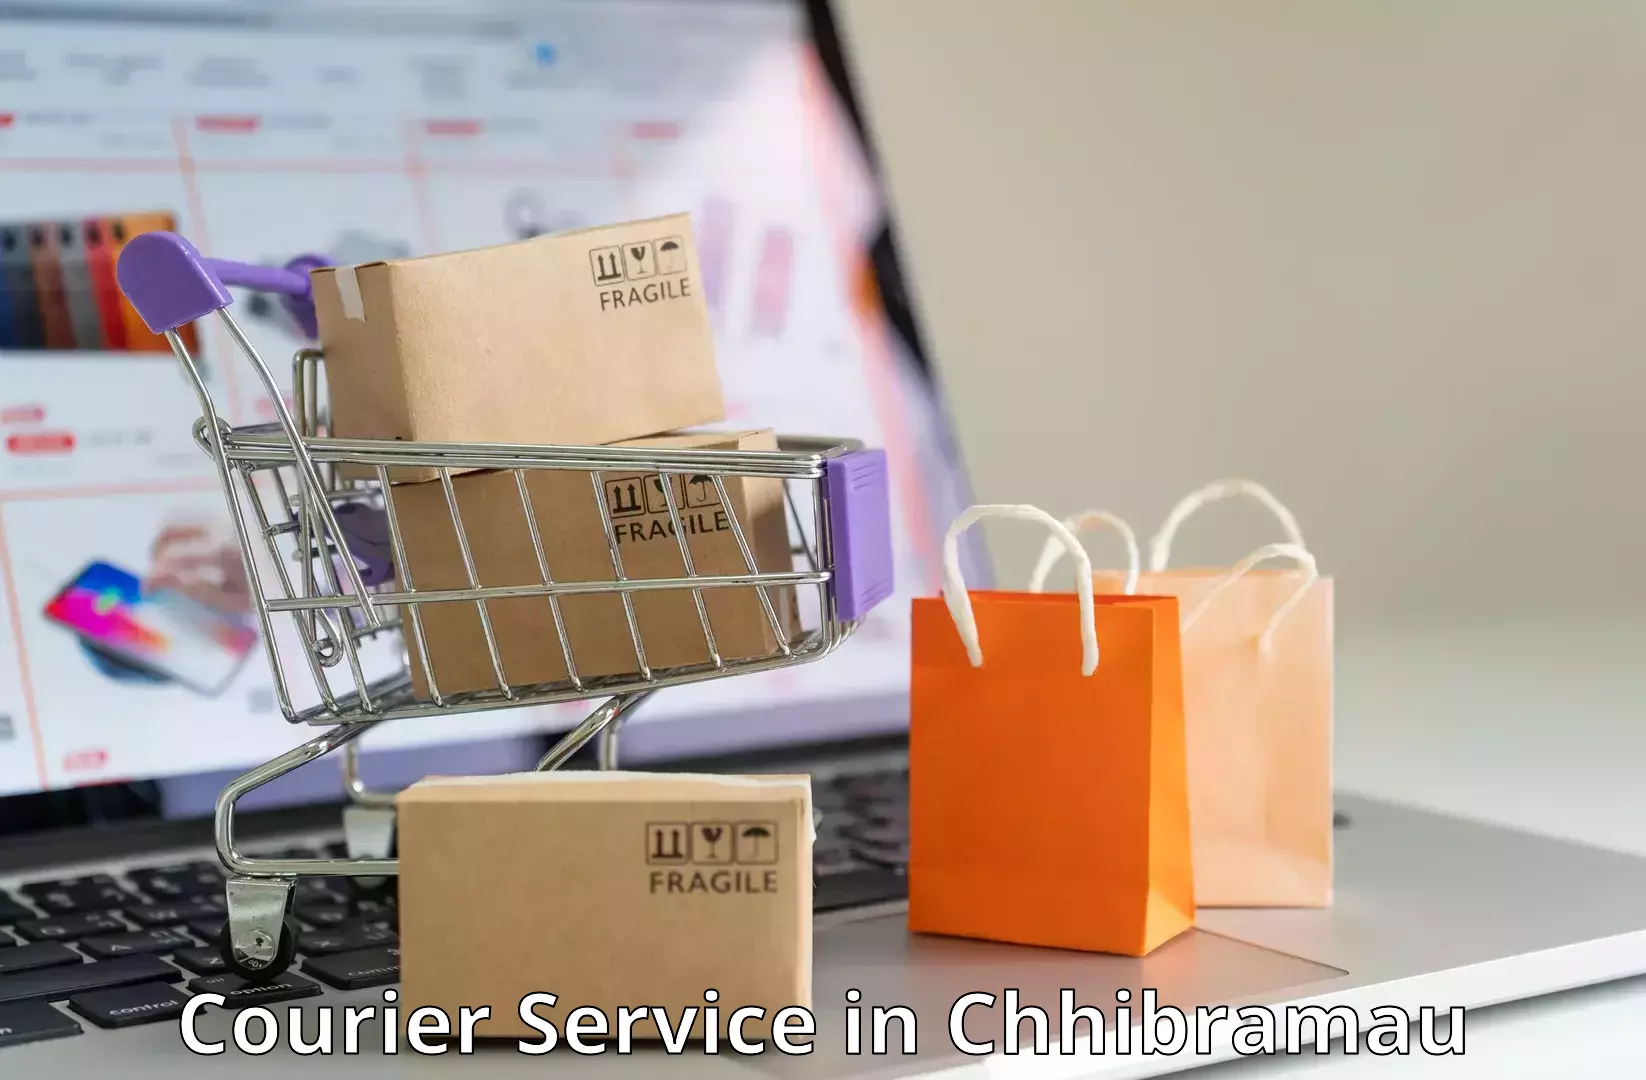 Multi-service courier options in Chhibramau